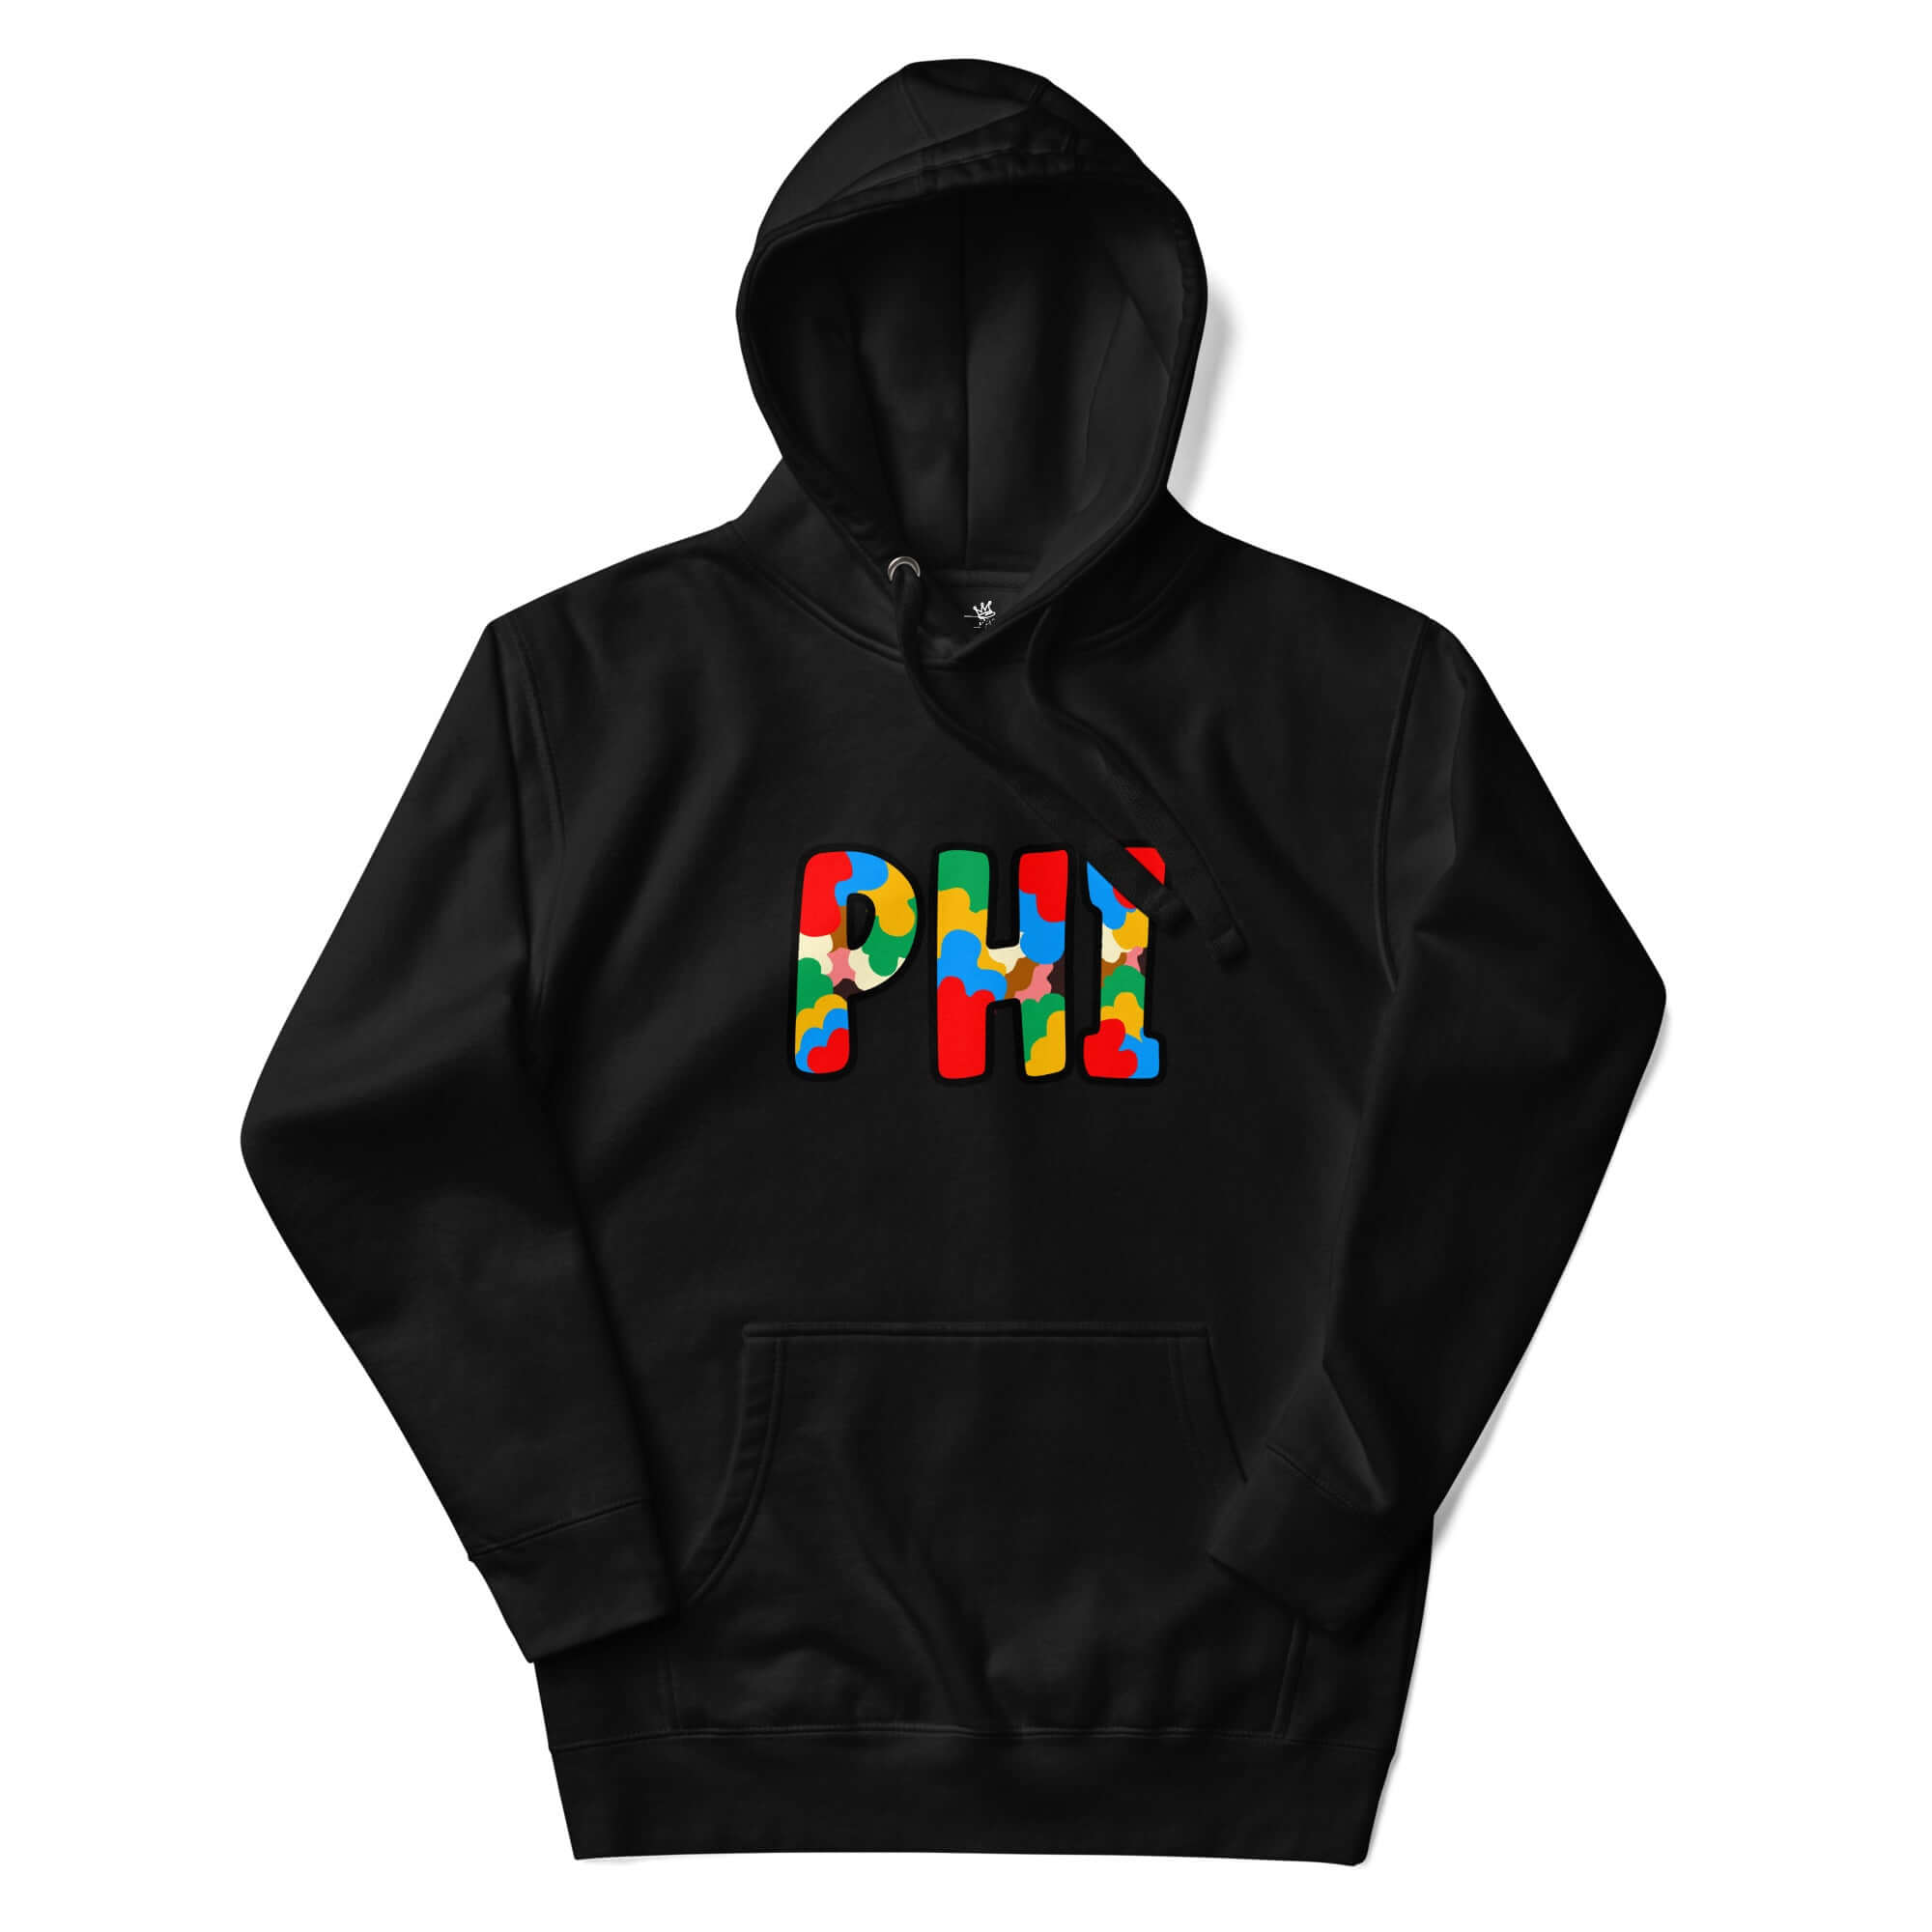 The City Collection PHI Unisex Hoodie